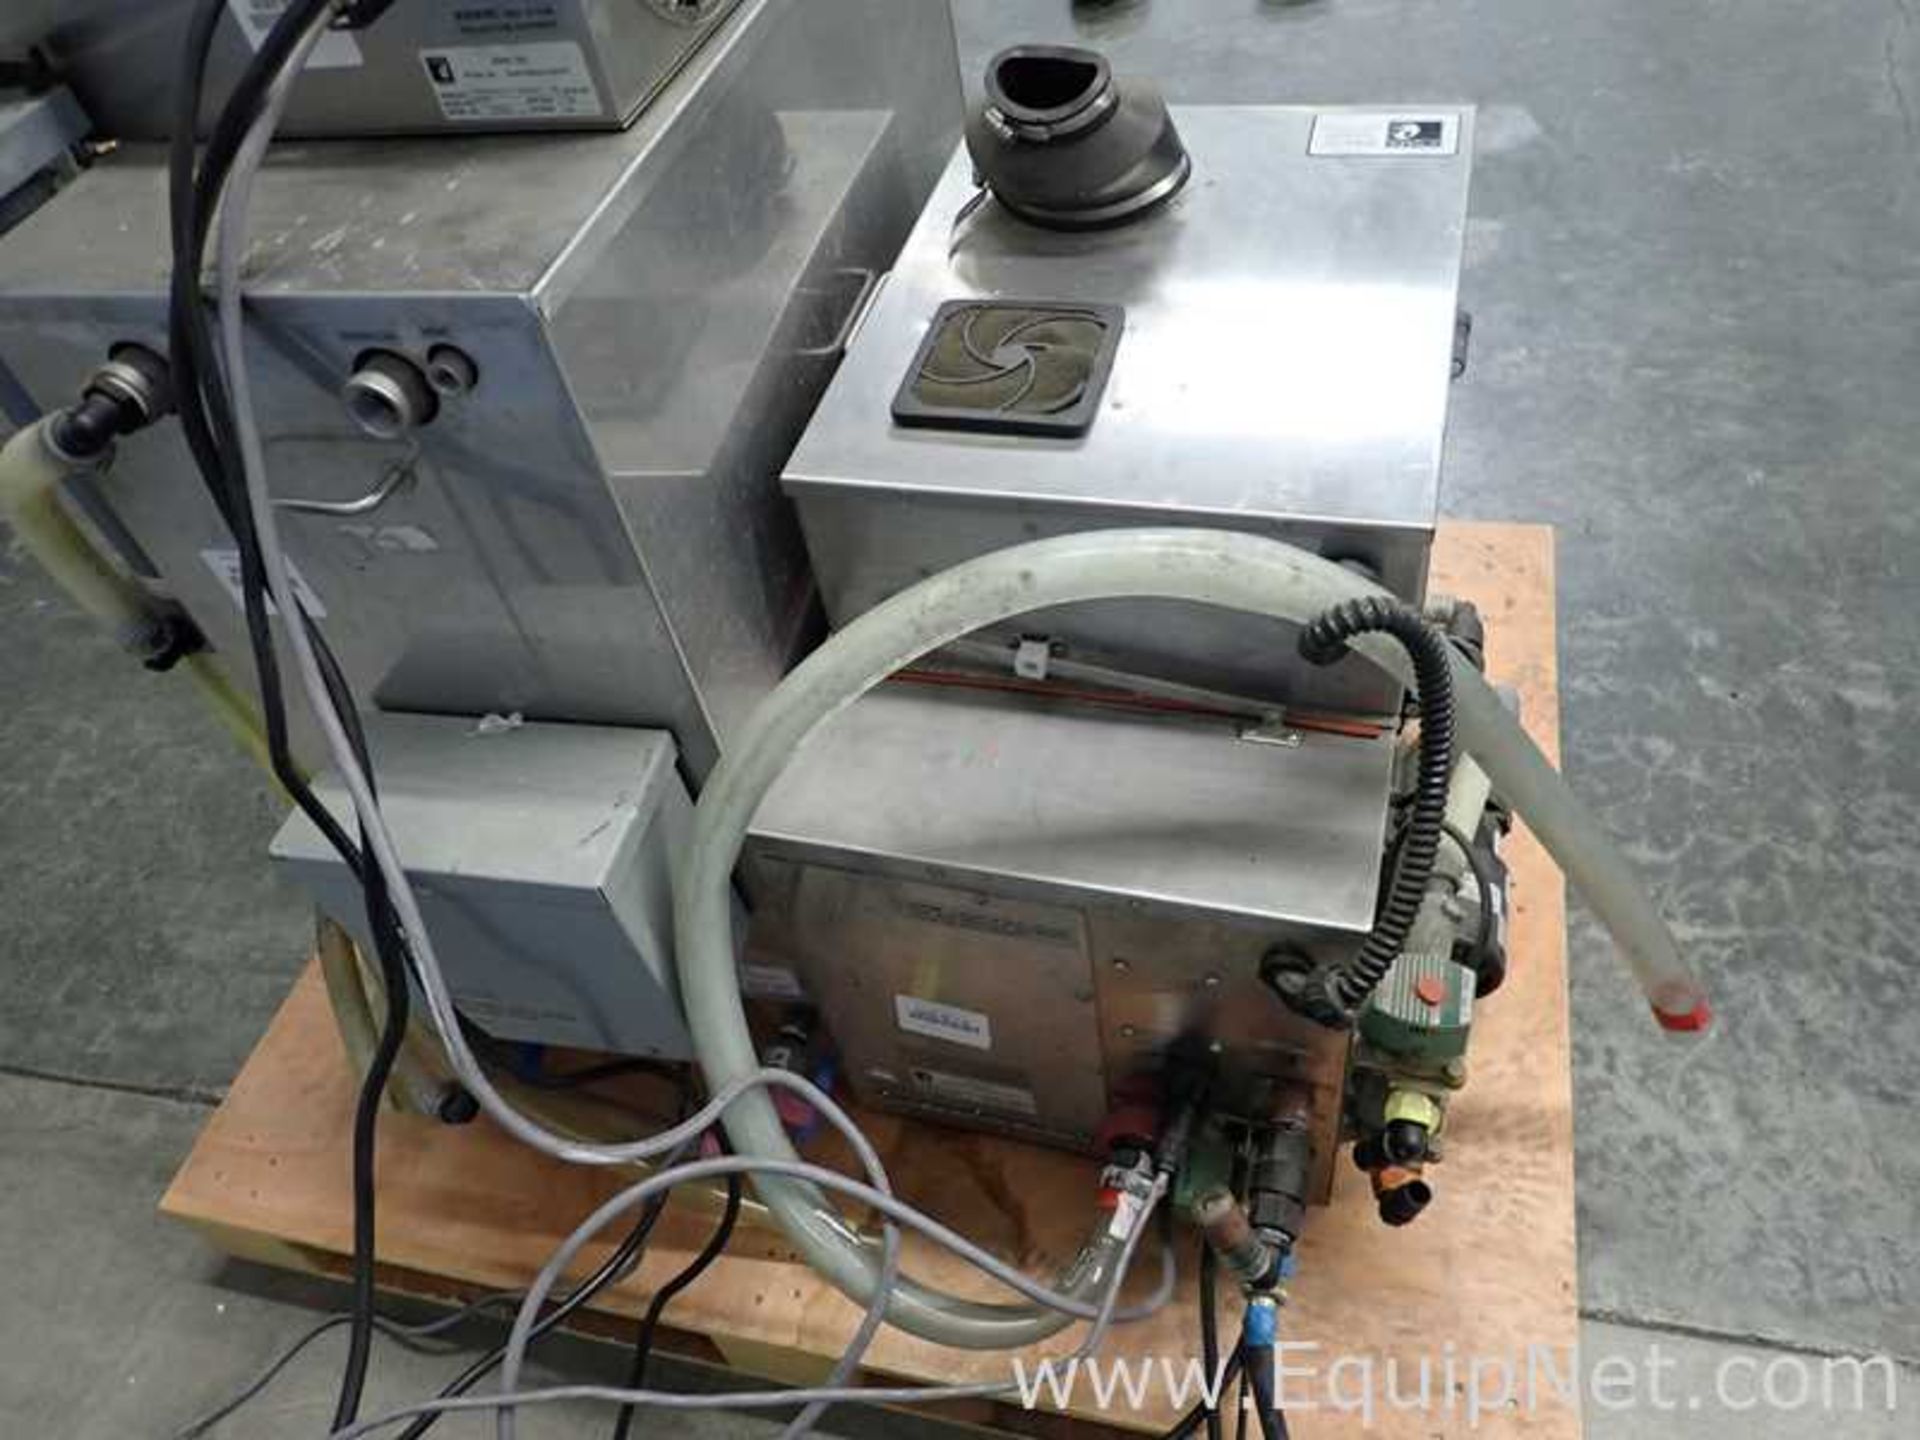 ESMA Inc. E700 Ultrasonic Cleaning System with E997 30Gal Heated Storage Tank - Image 35 of 38